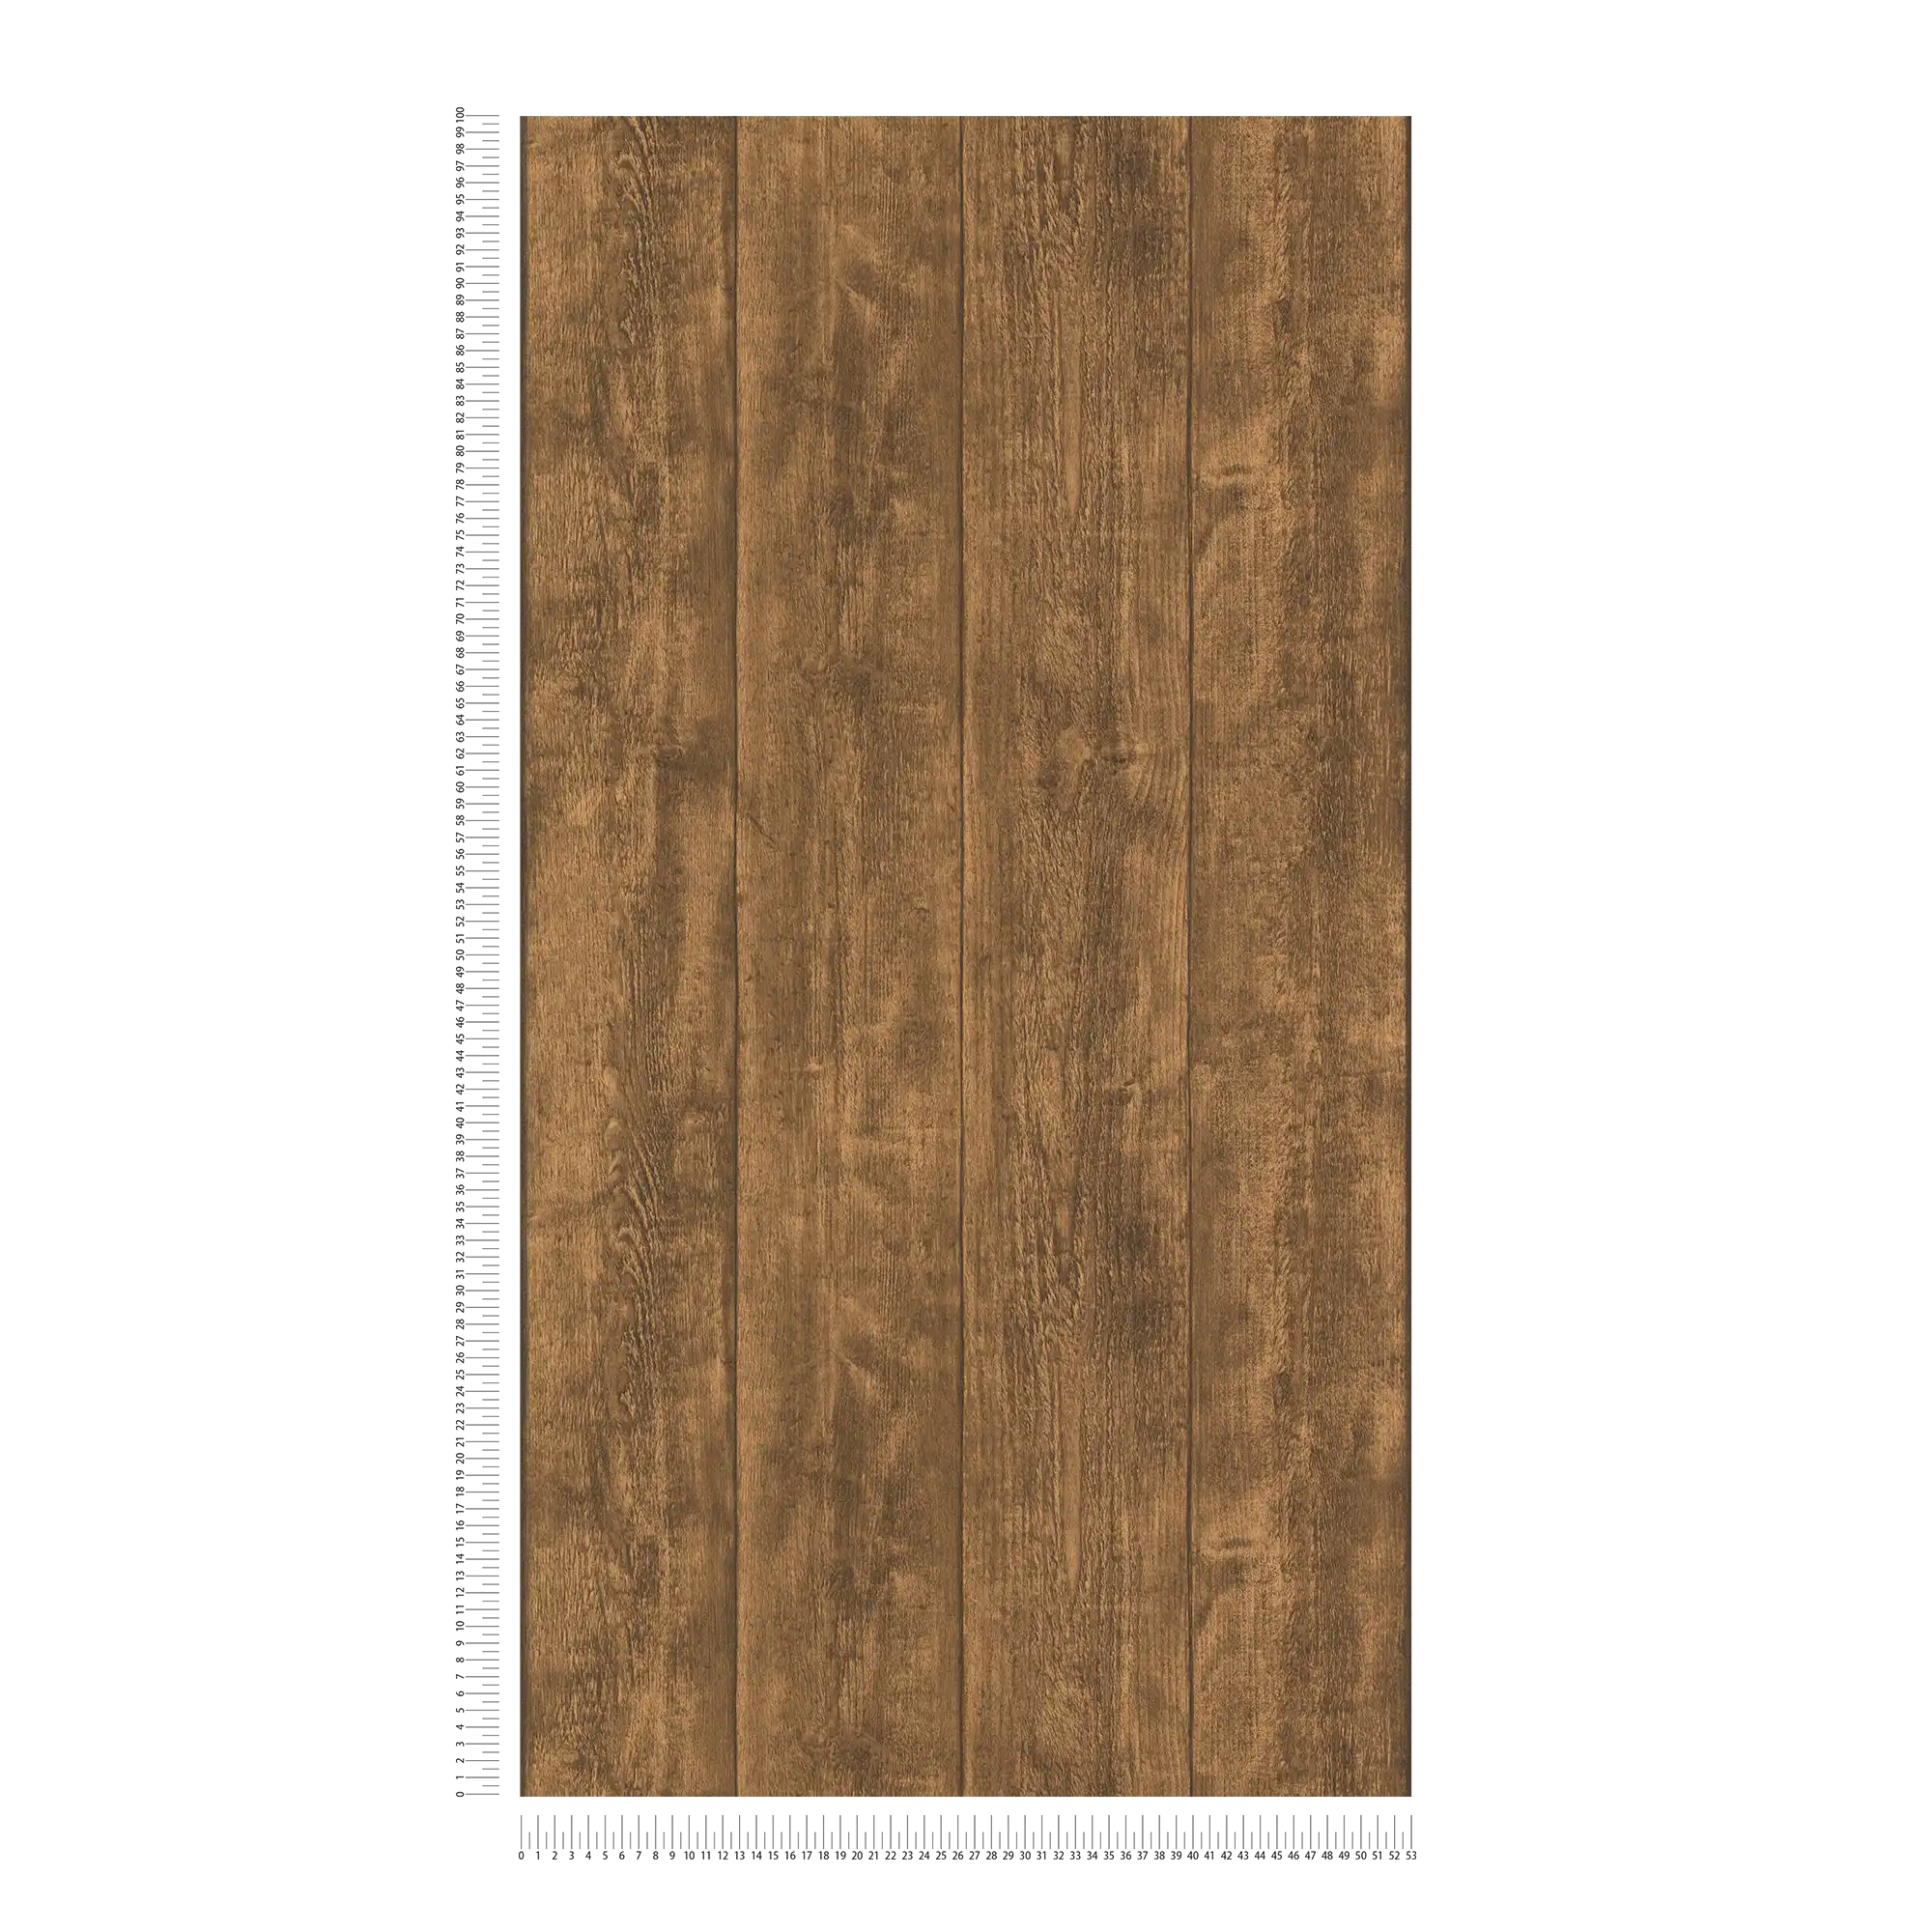             Wood look non-woven wallpaper with rustic grain - brown
        